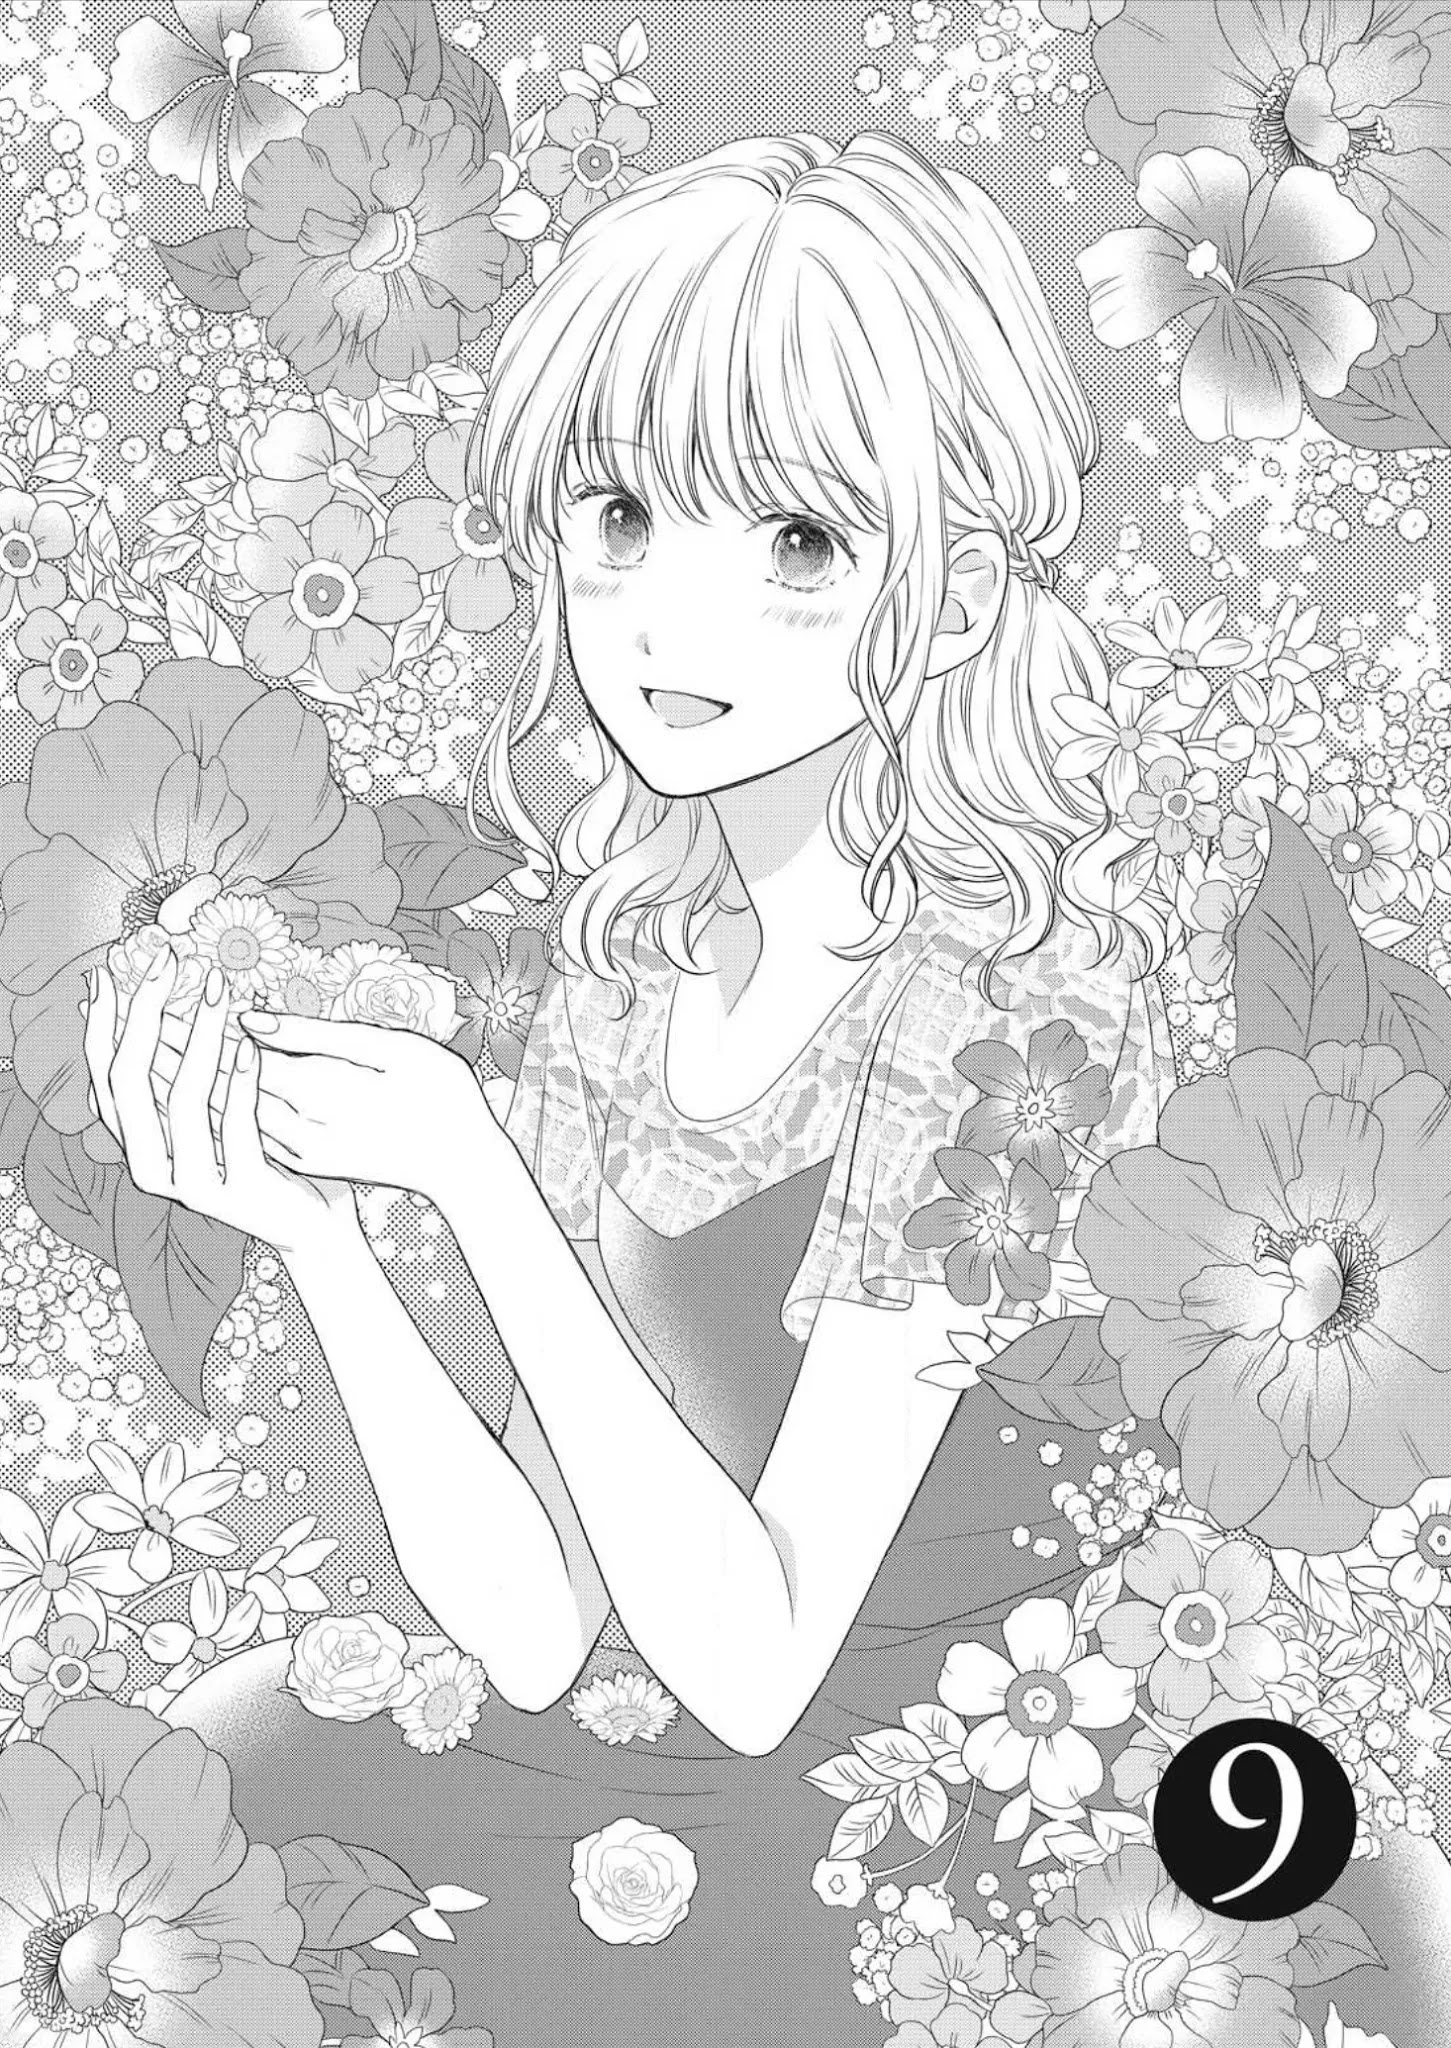 Hana Wants This Flower To Bloom! - Page 2